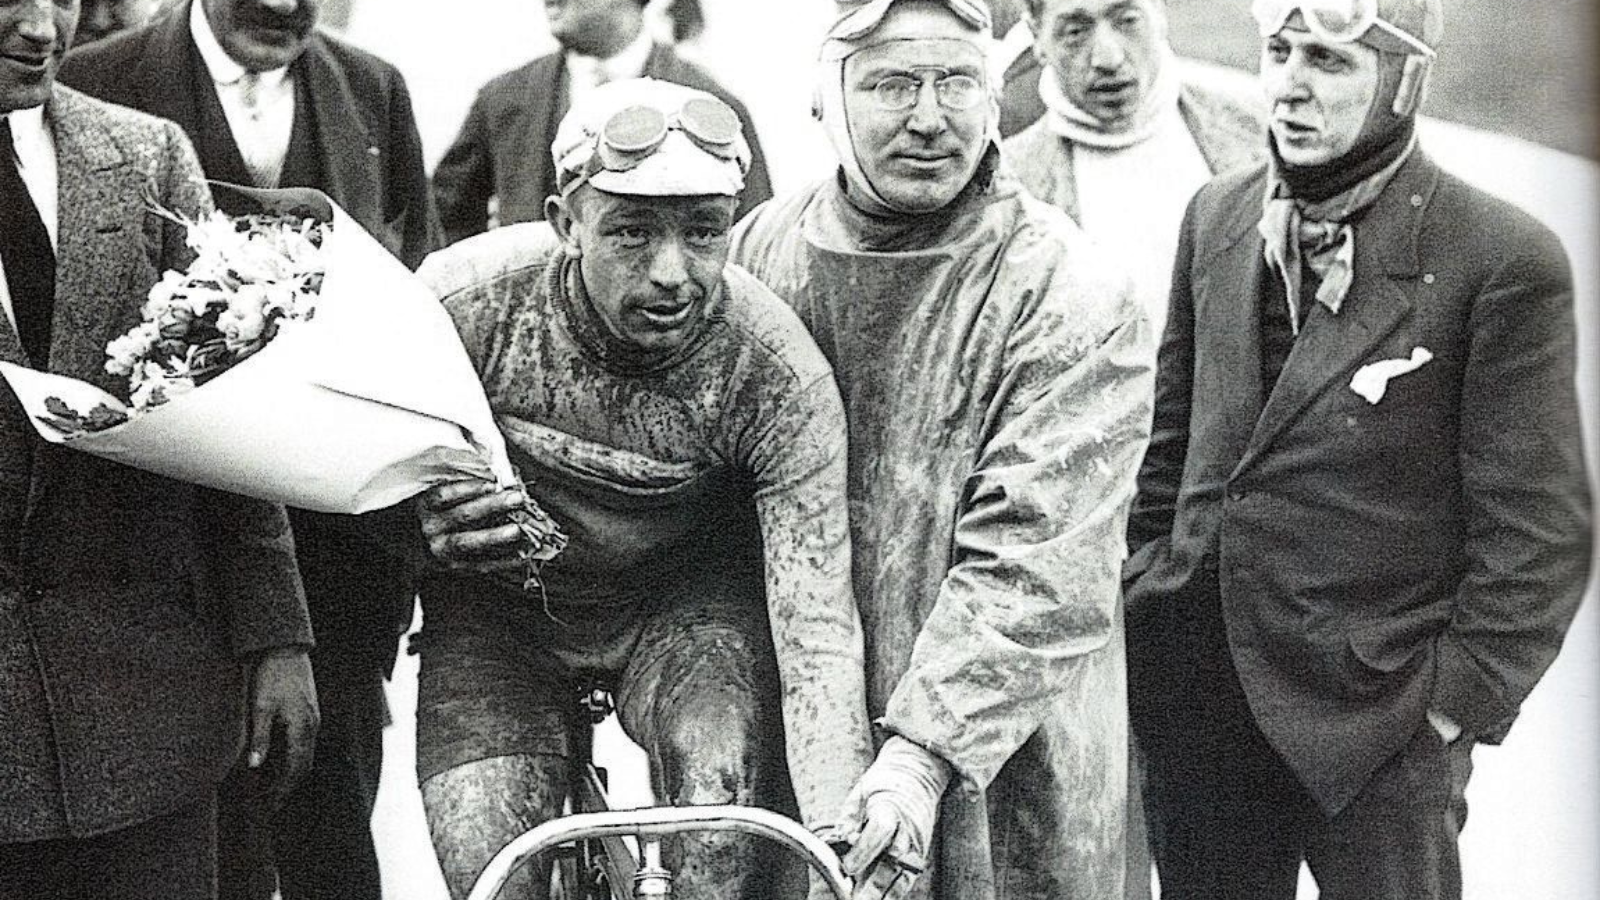 The first Tour of Flanders 1913 and the first winner of the rsce Paup Deman, who is sitting in the saddle of his bicycle